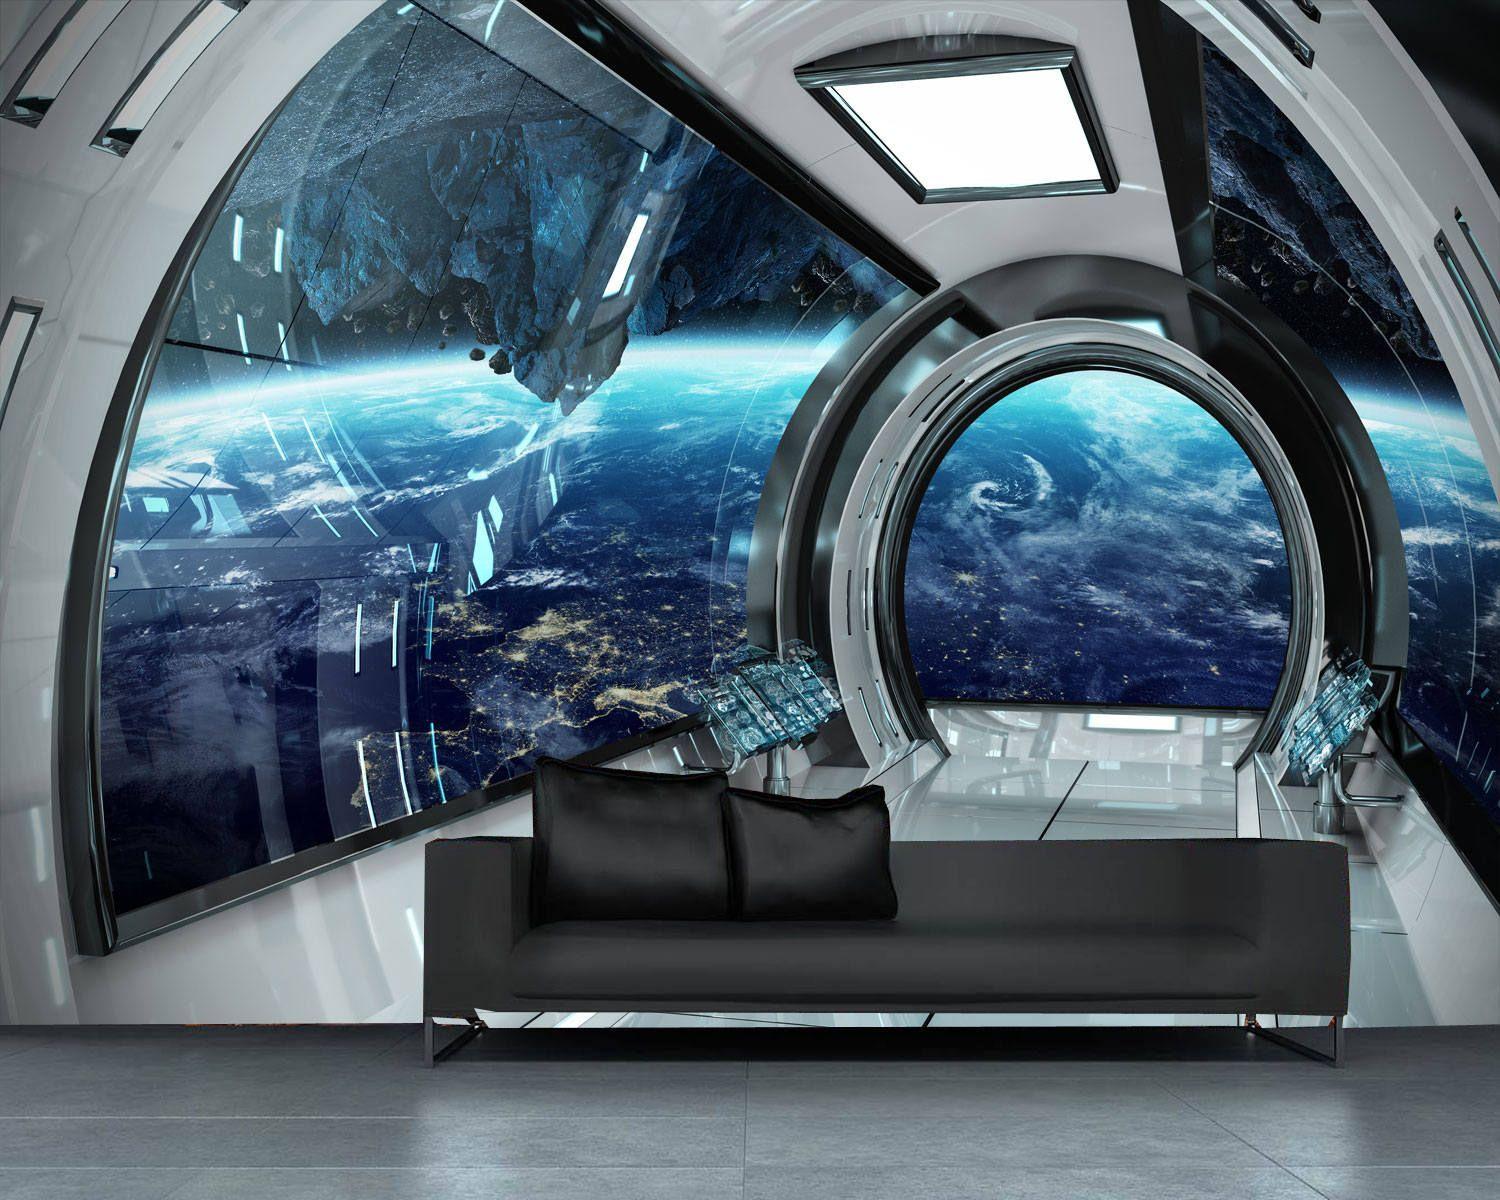 Spaceship Interior Wallpapers - Top Free Spaceship Interior Backgrounds